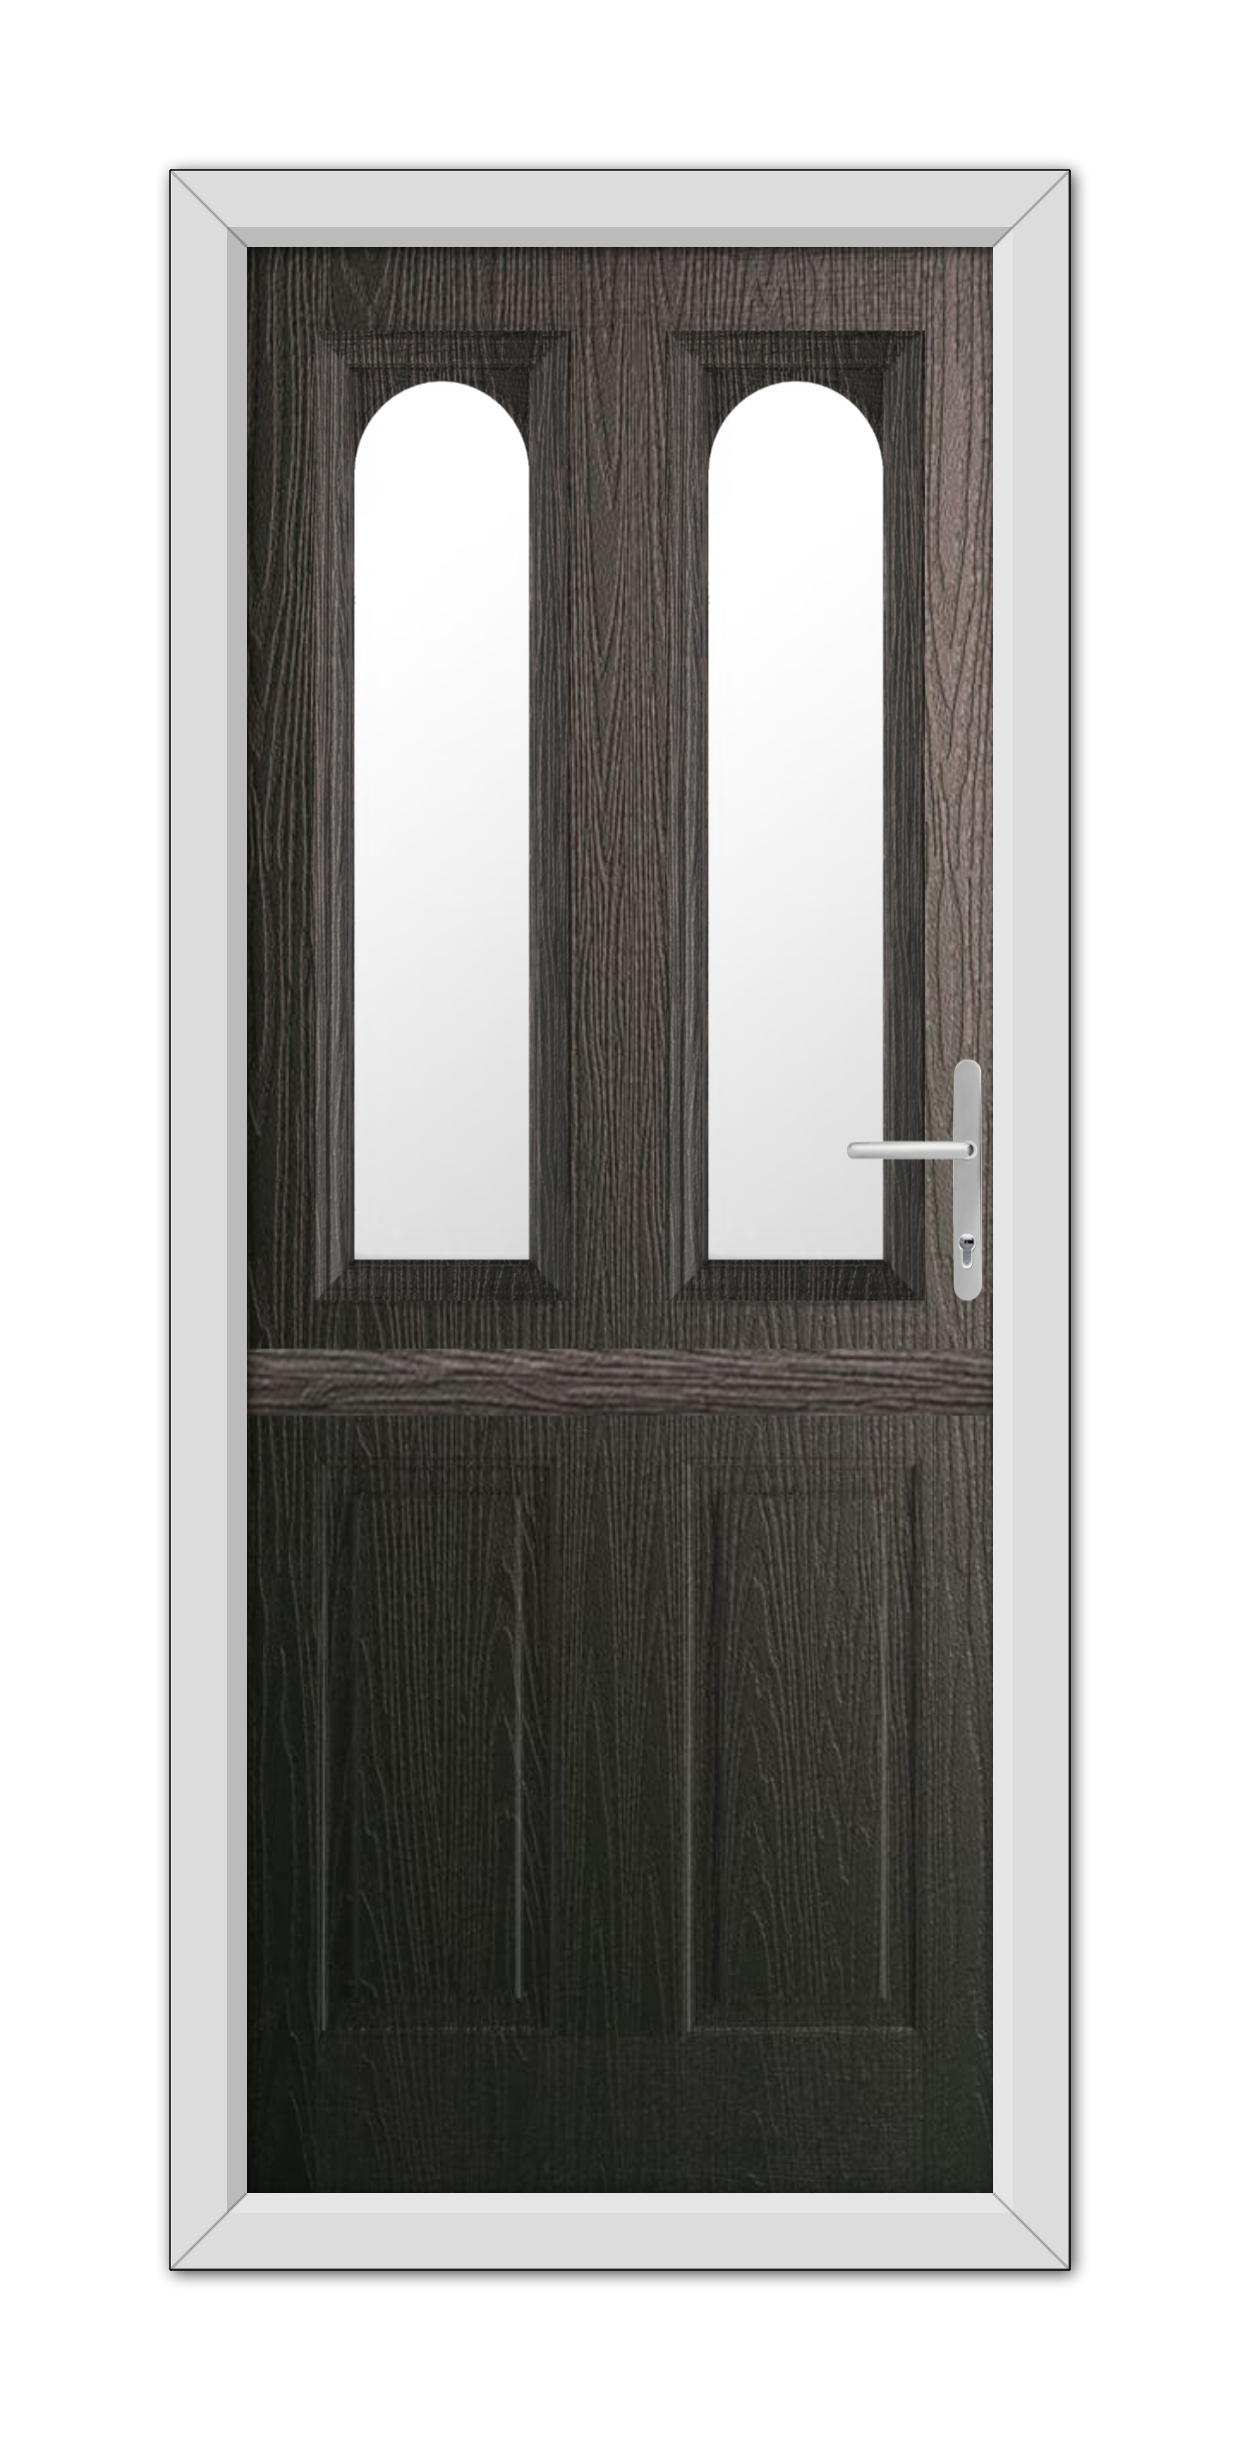 A Schwarzbraun Elmhurst Stable Composite Door 48mm Timber Core with two vertical glass panels and a metallic handle, isolated on a white background.